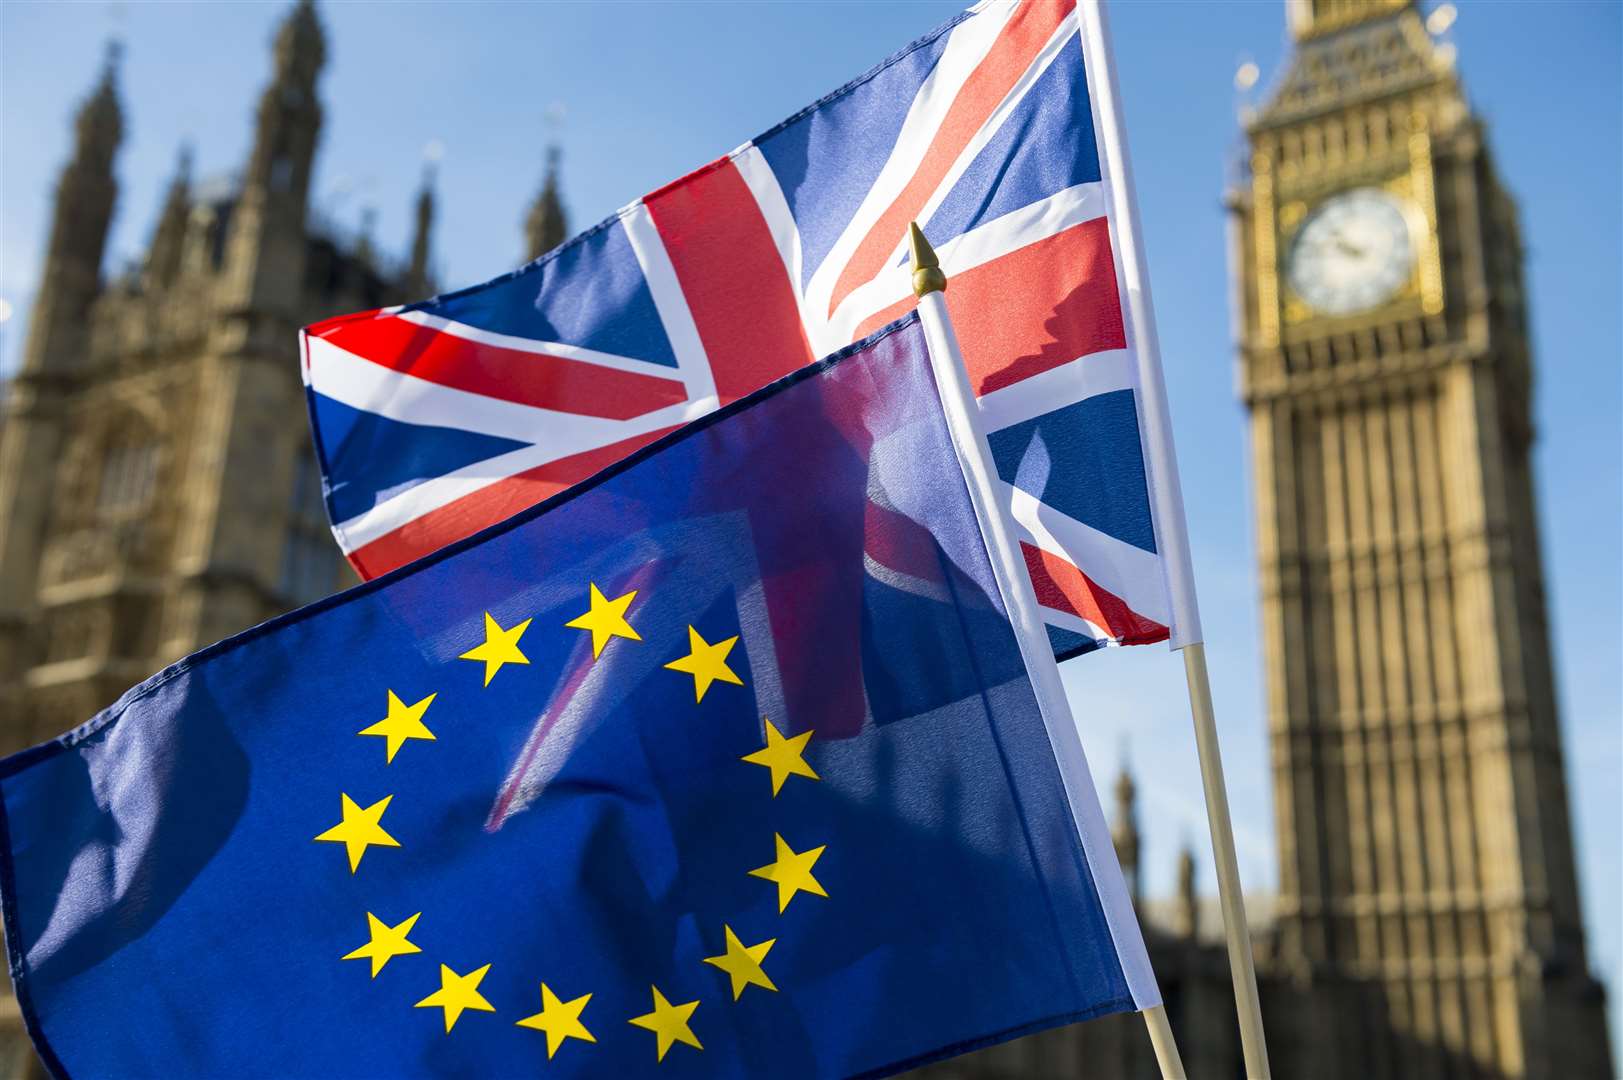 Brexit remains a contentious issue ahead of the EU withdrawal date at the end of the month.